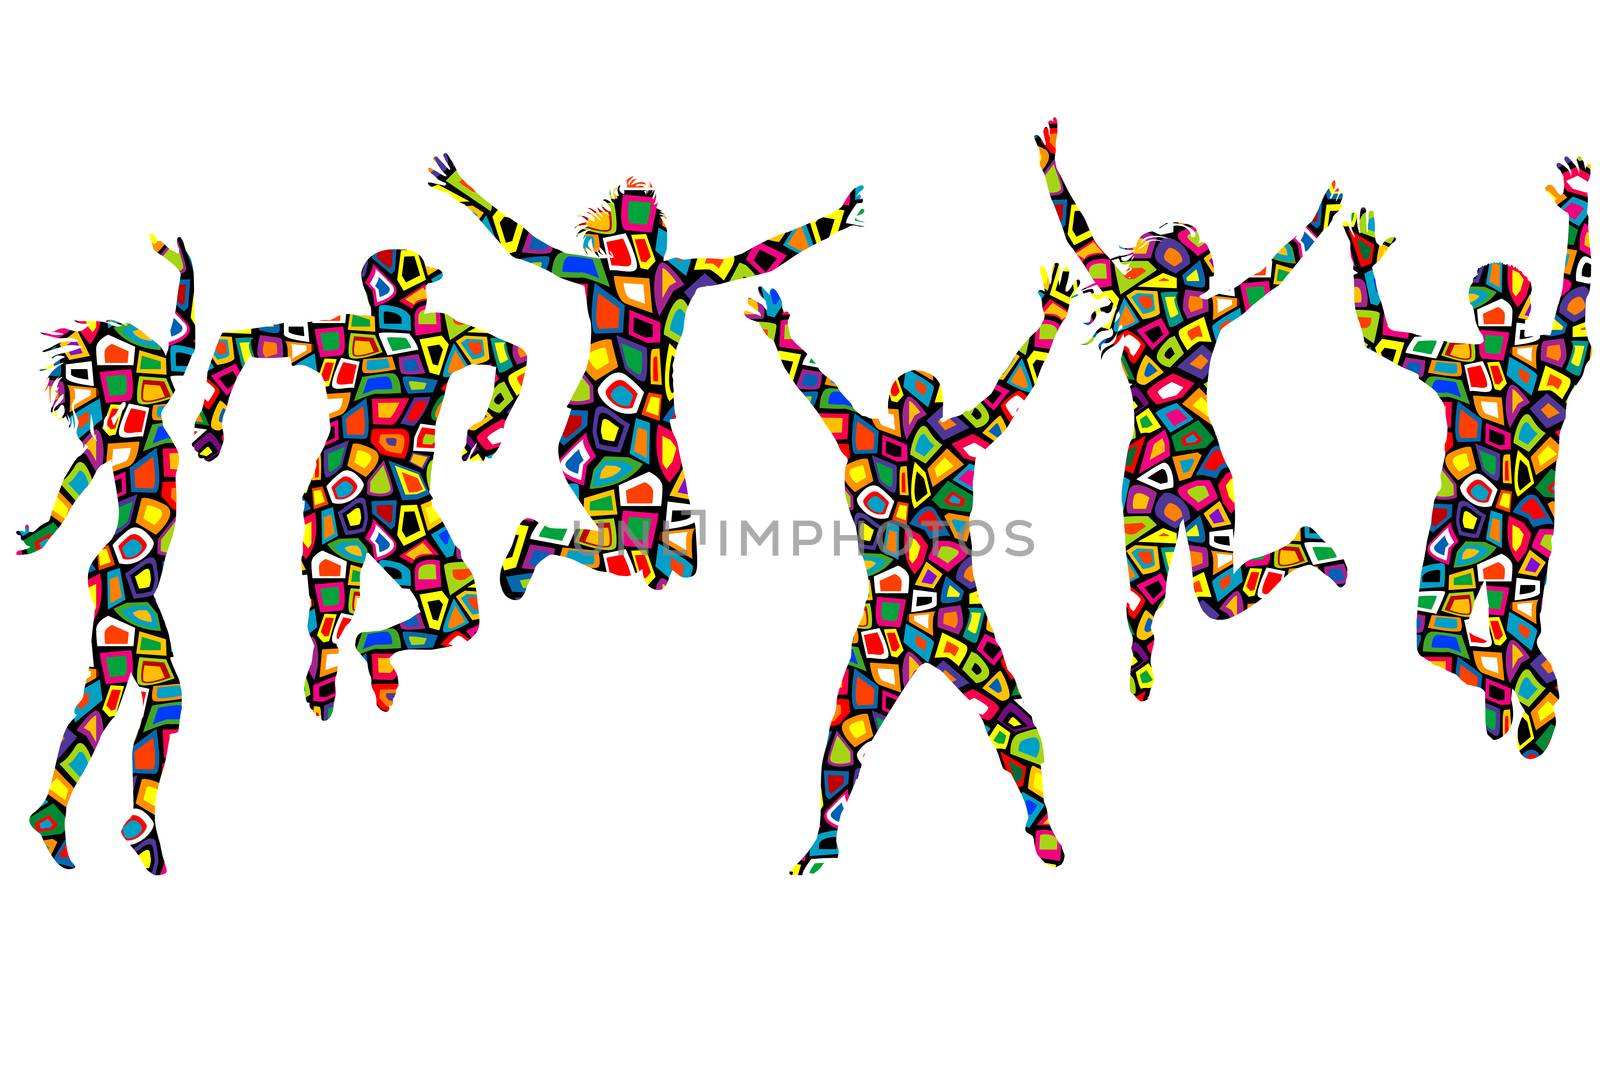 Silhouettes of men and women in colorful pattern by hibrida13